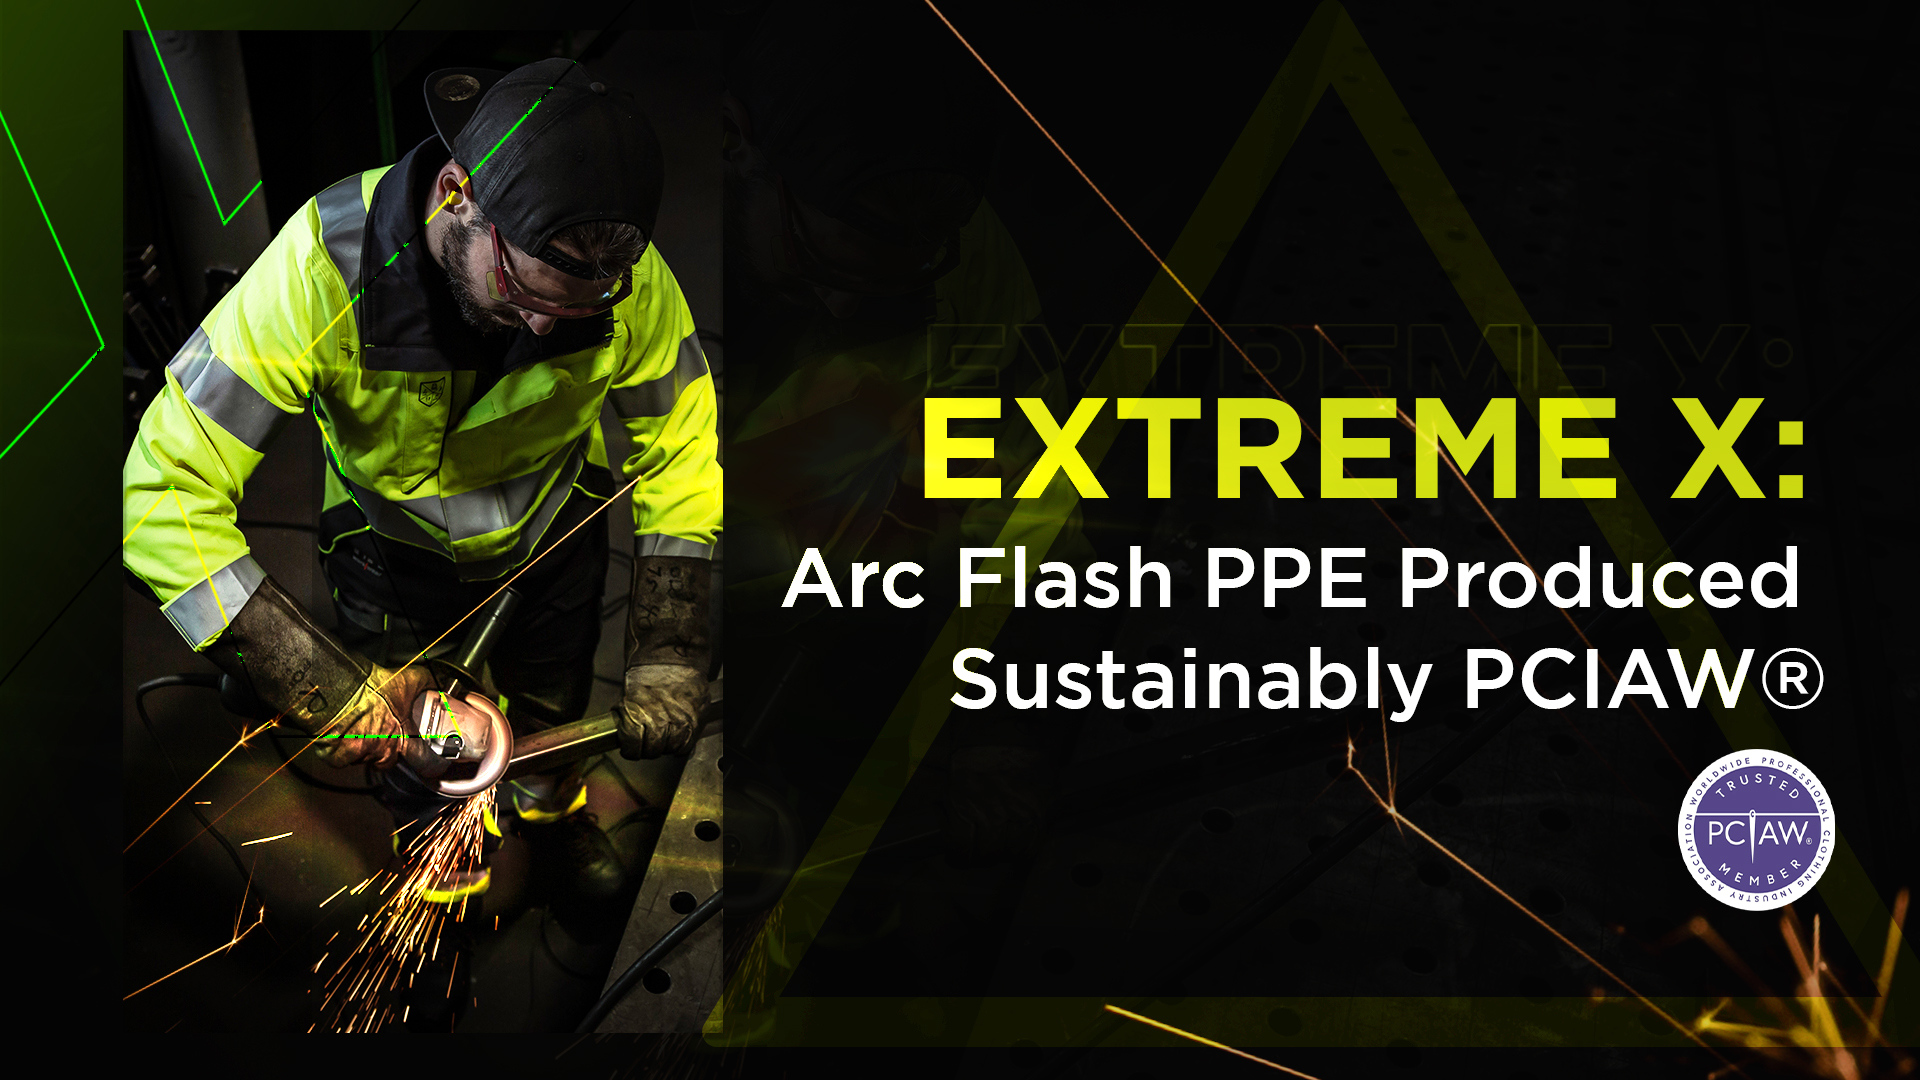 Daletec’s Extreme X: Arc Flash PPE Produced Sustainably PCIAW